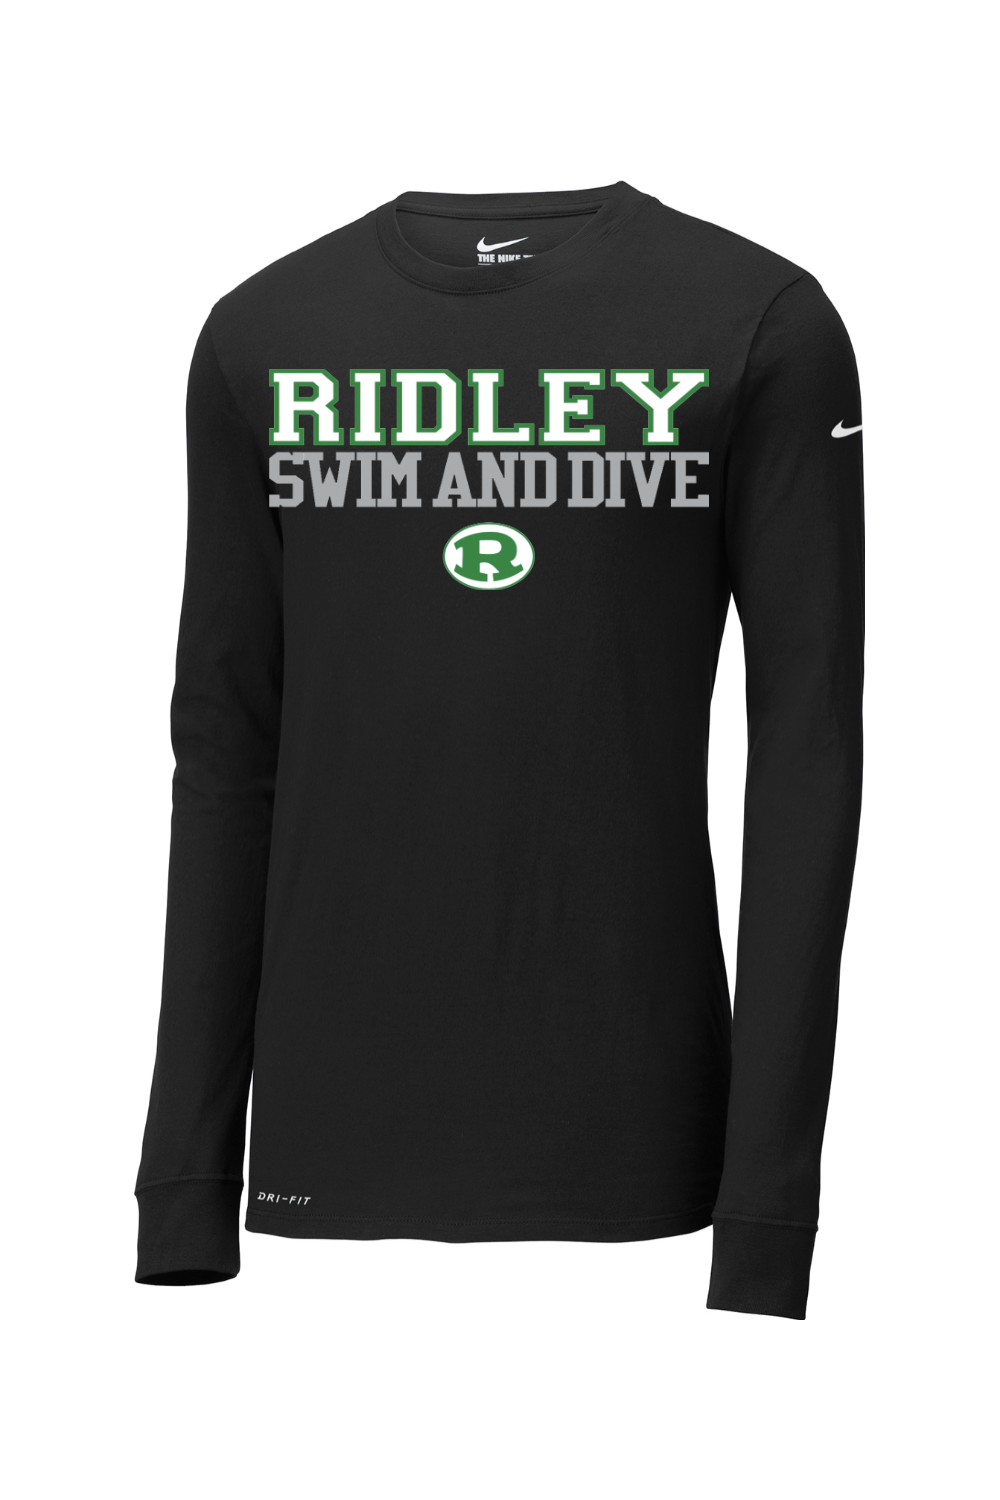 Ridley Swim and Dive Nike Dri-FIT Cotton/Poly Long Sleeve Tee